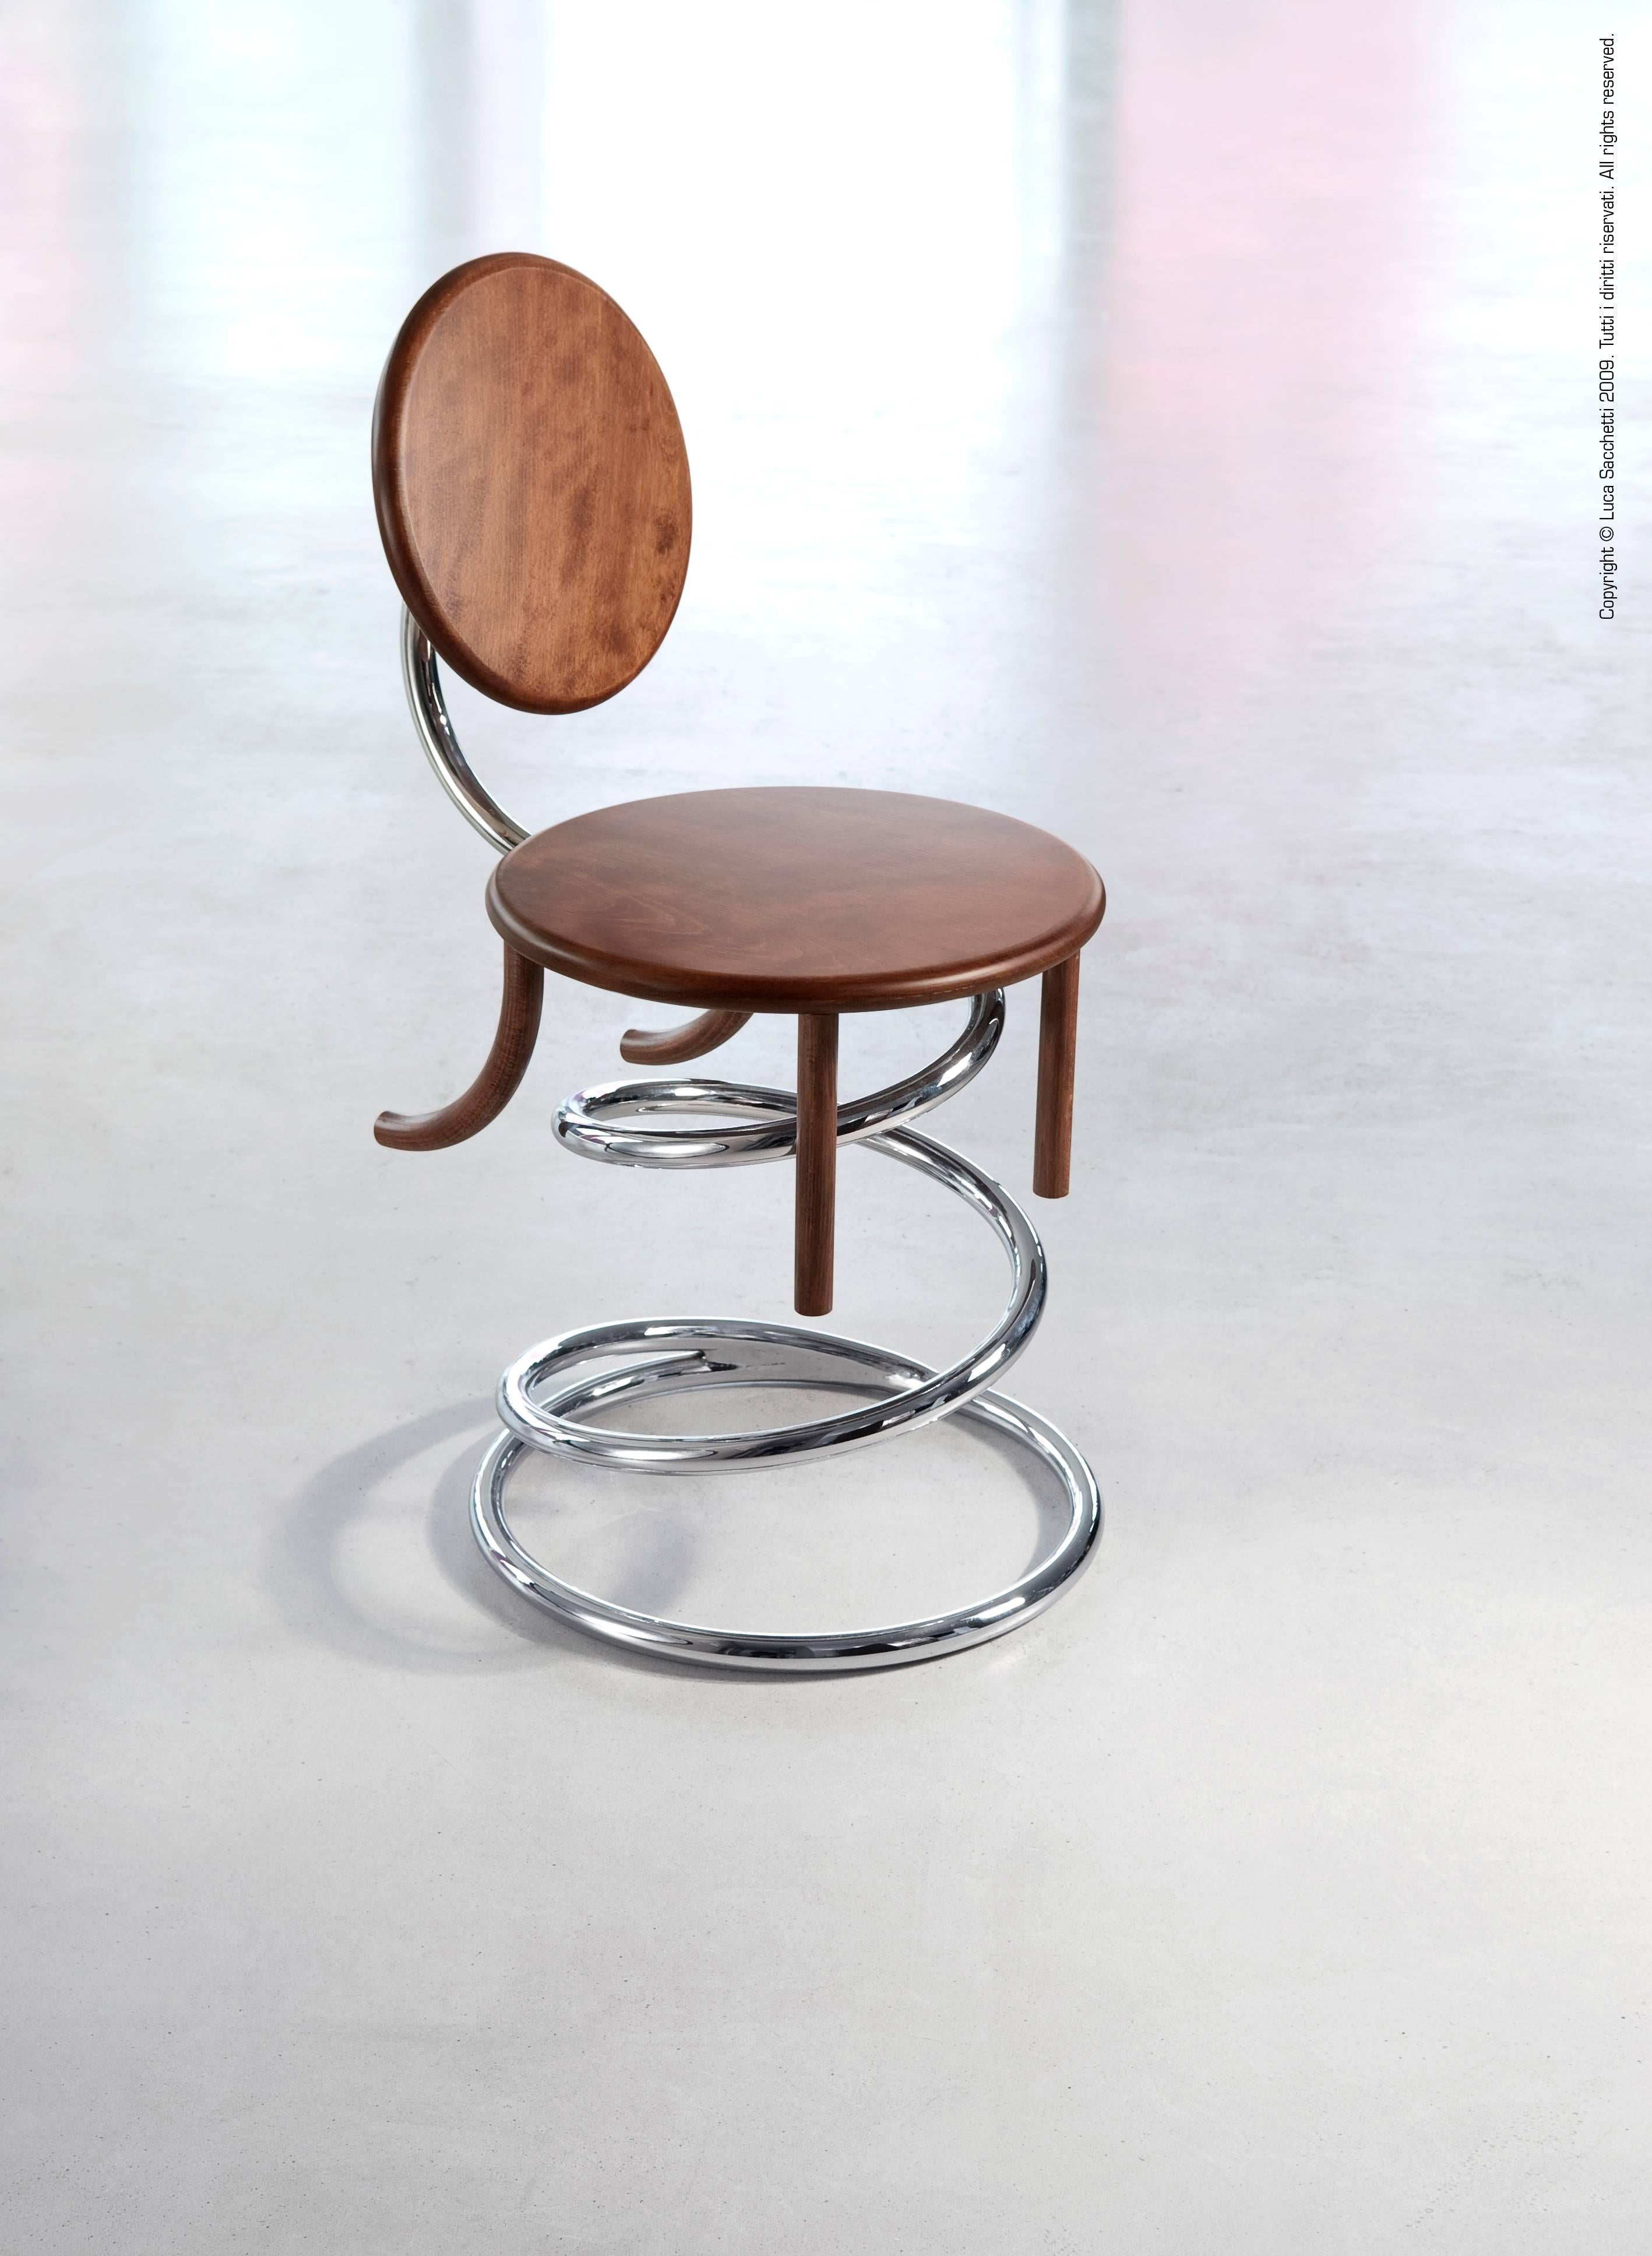 Italian Sedia in Libertà Chair in Beechwood and Steel Chromed by Luca Sacchetti For Sale